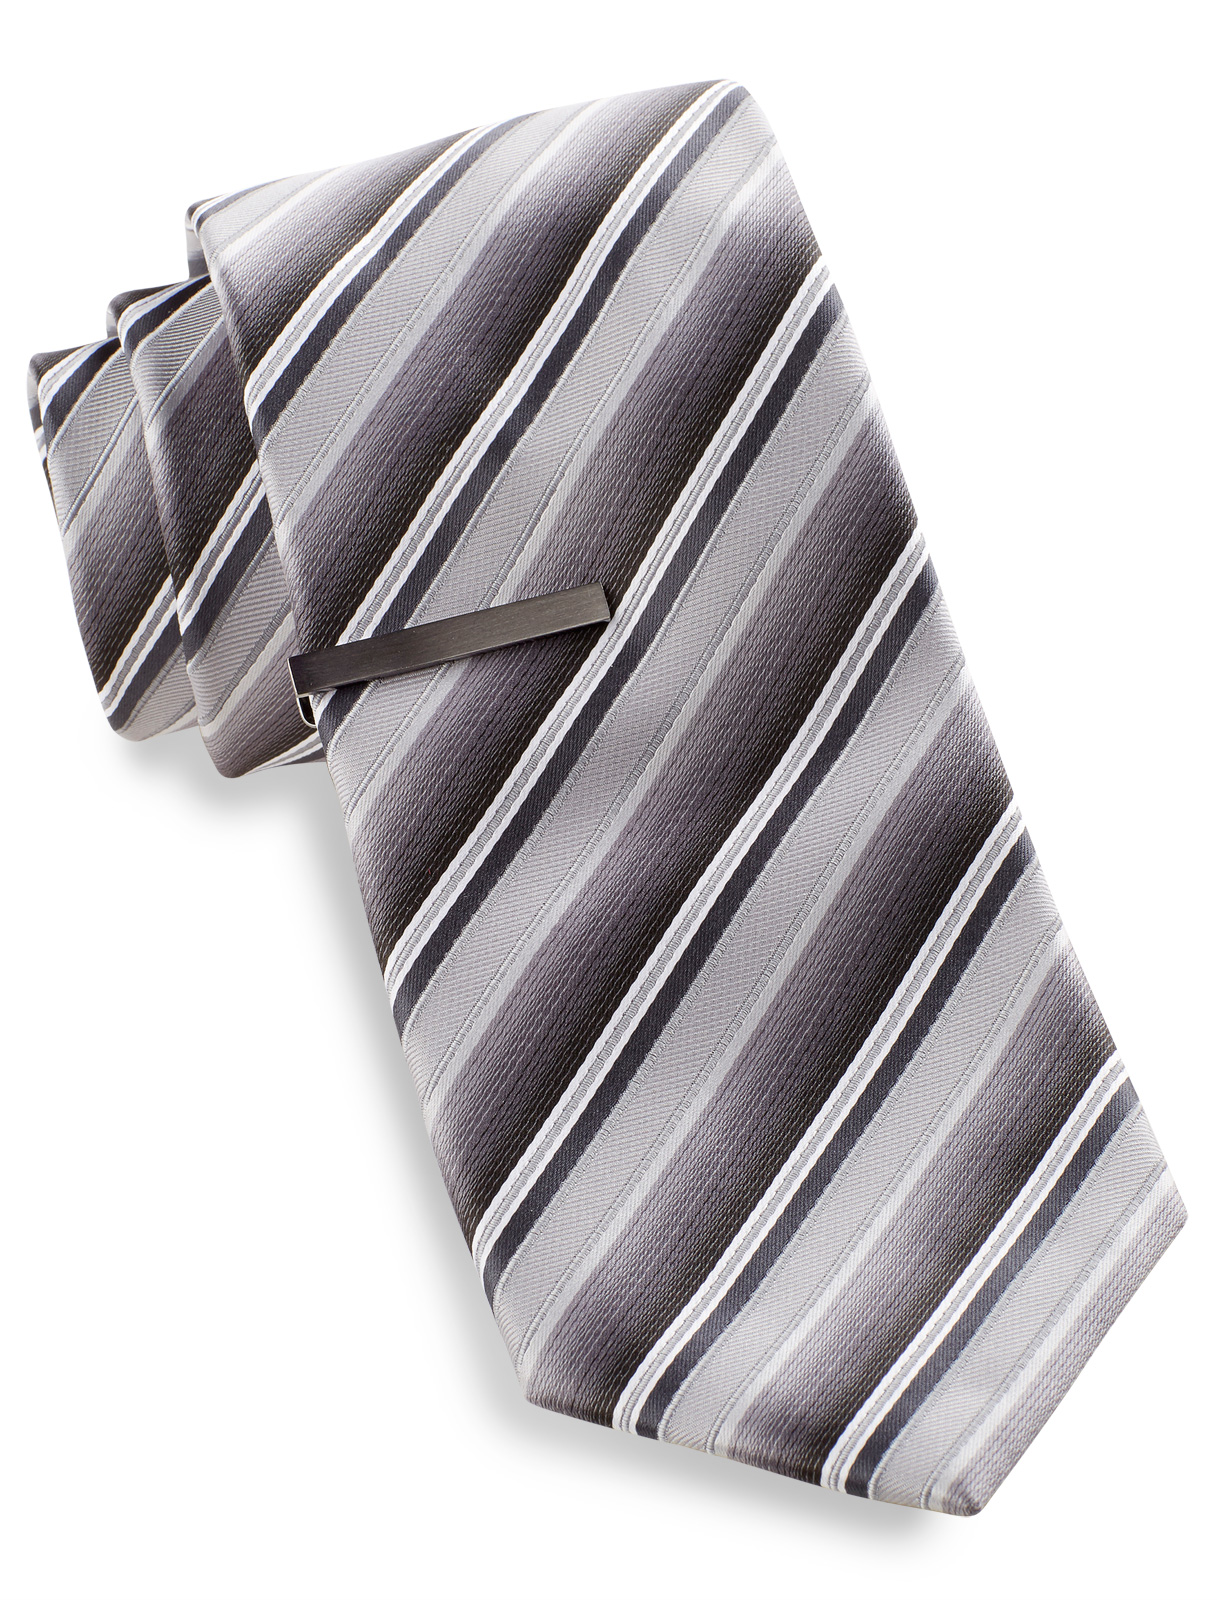 Gold Series Men's Big and Tall  Stripe Tie with Tie Bar